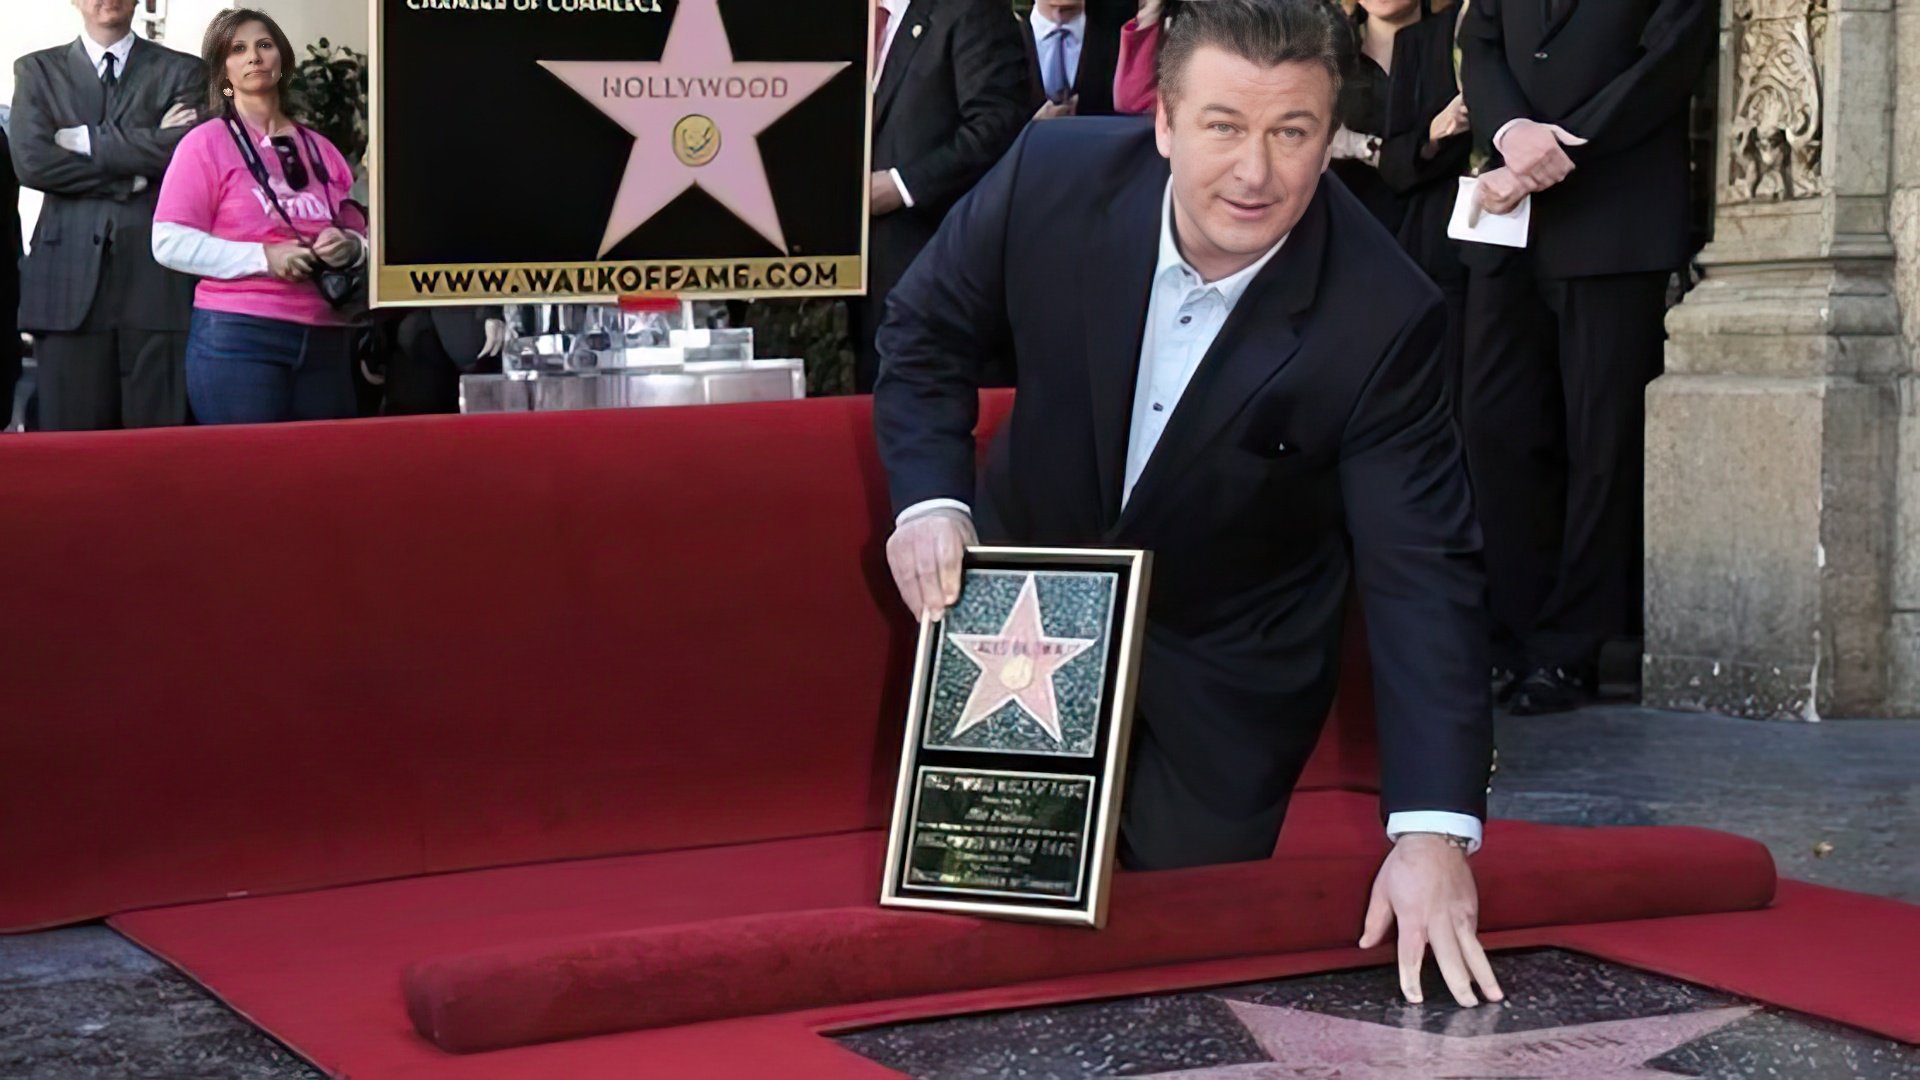 Alec Baldwin honored with a star on Hollywood Walk of Fame